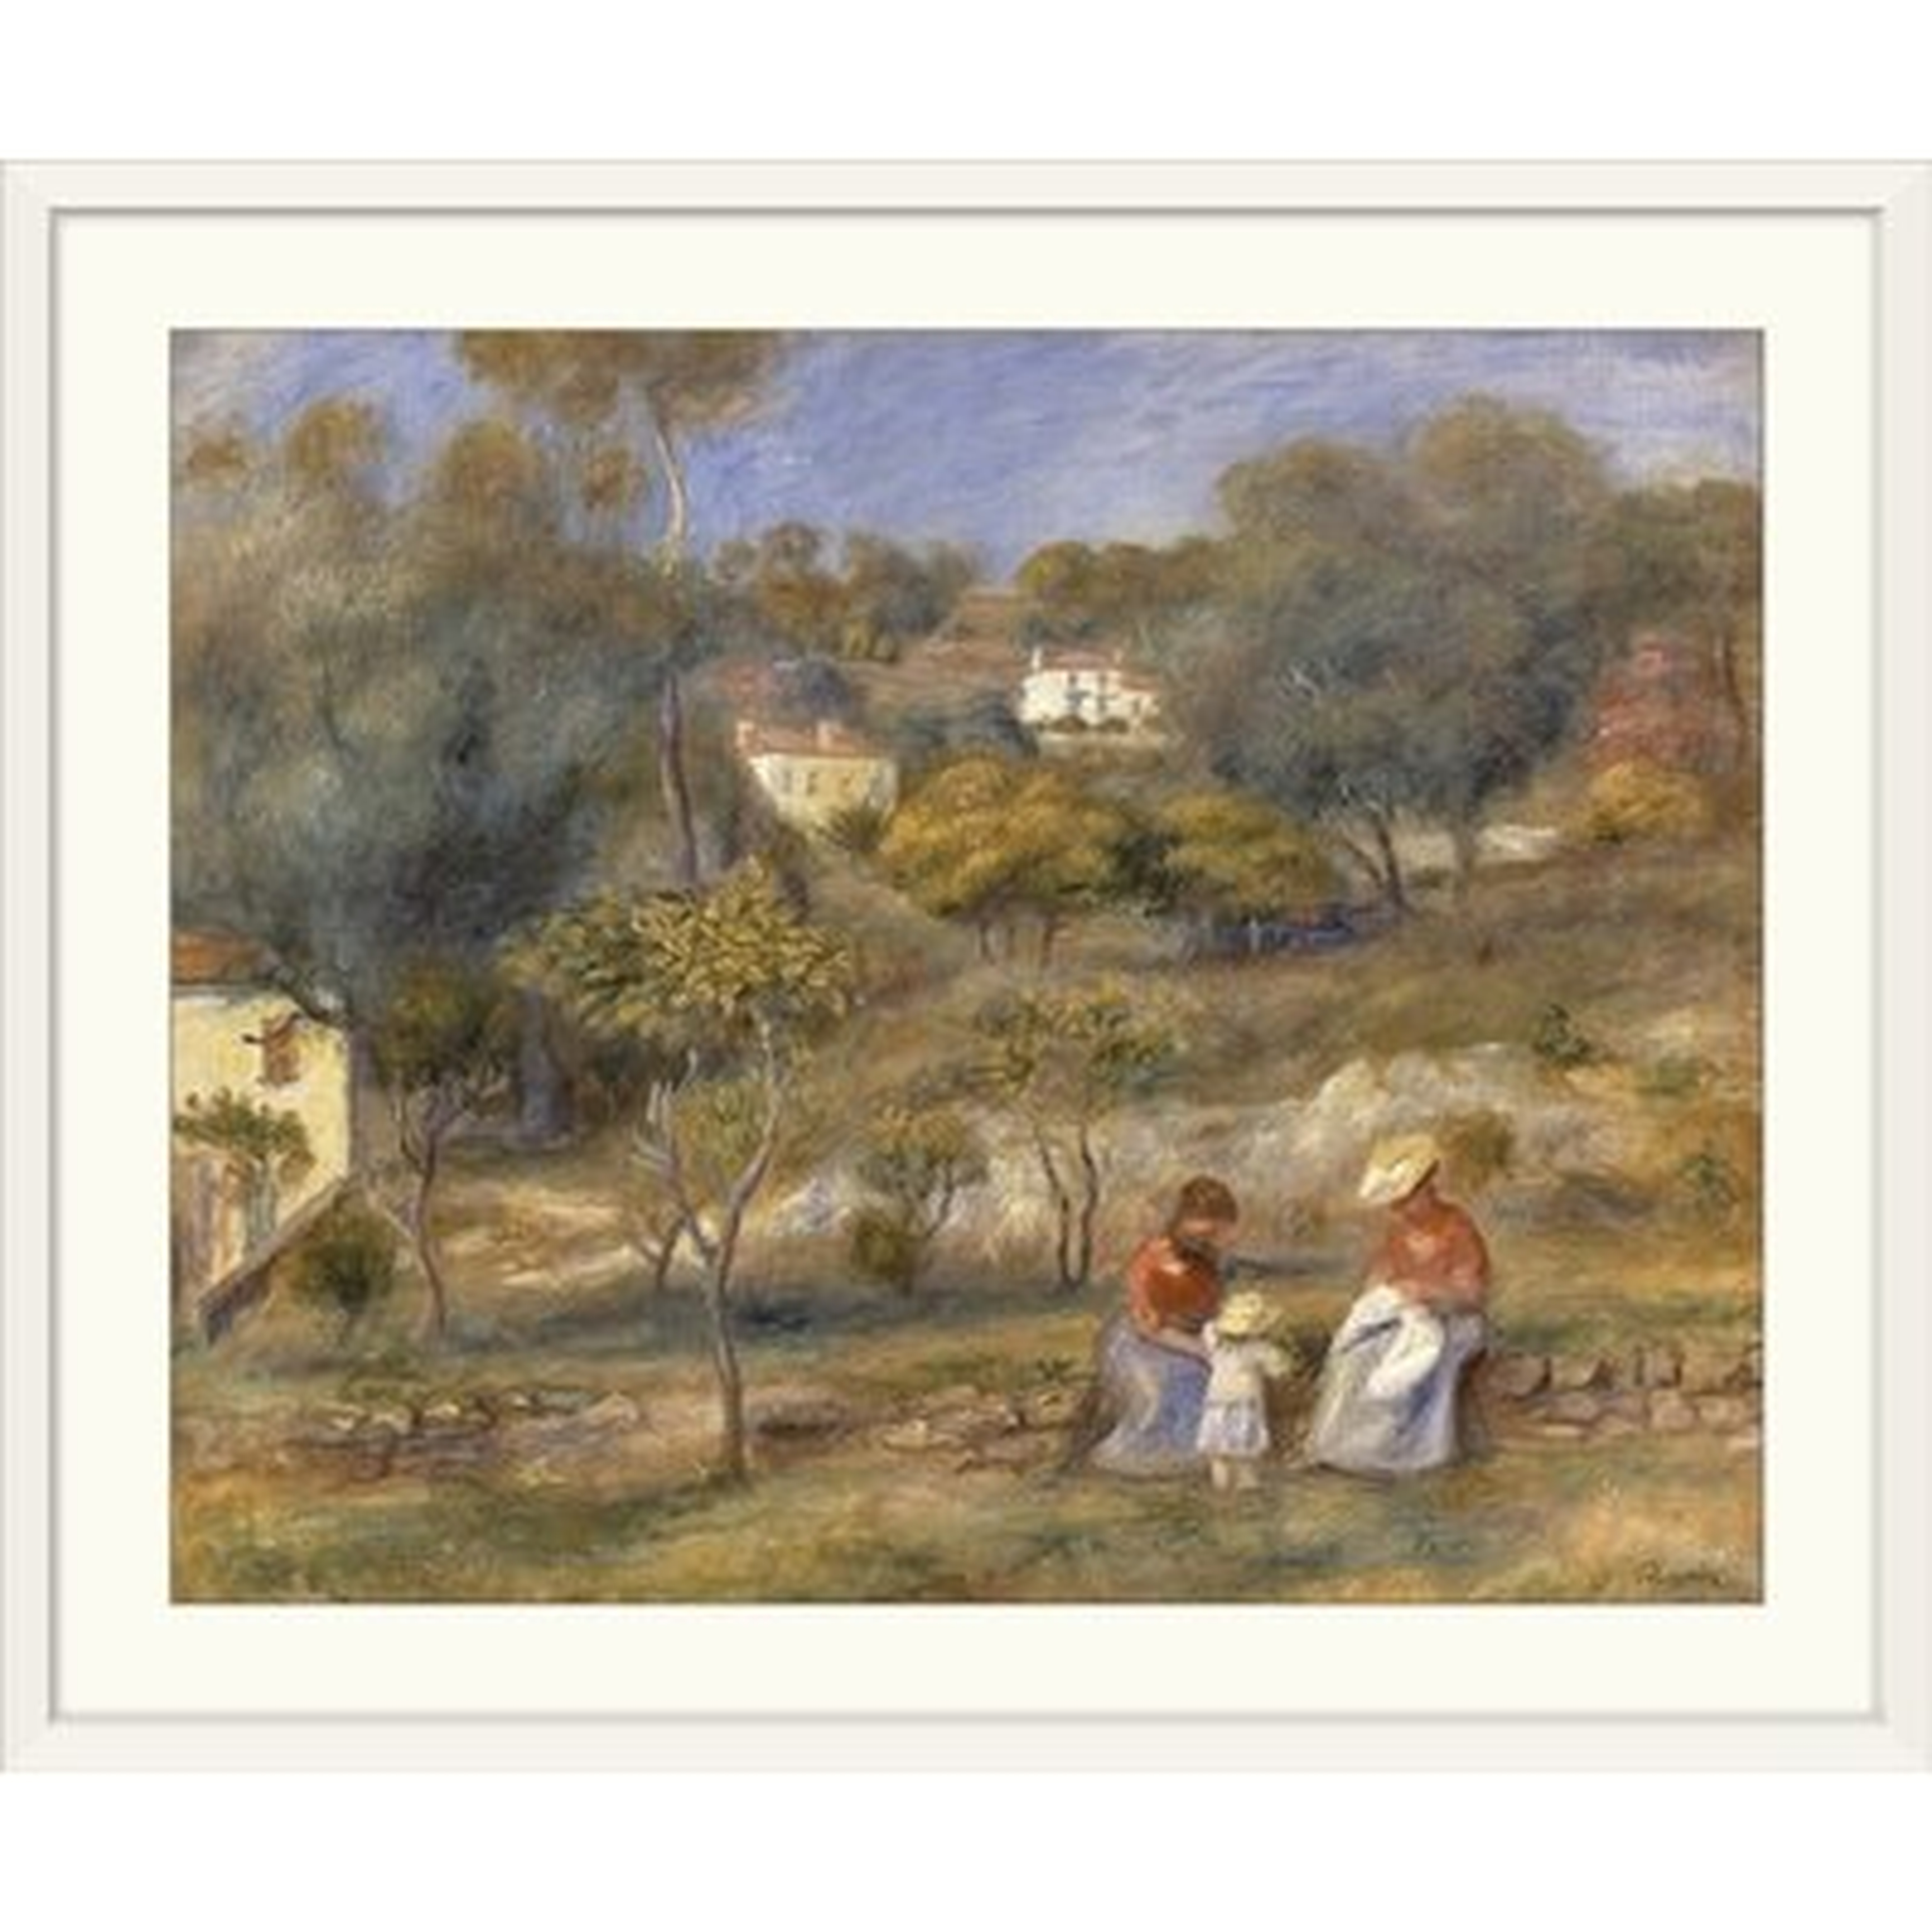 'Two Women and a Child, Impressionist Landscape Painting , 1902' by Pierre-Auguste Renoir Painting Print - Wayfair